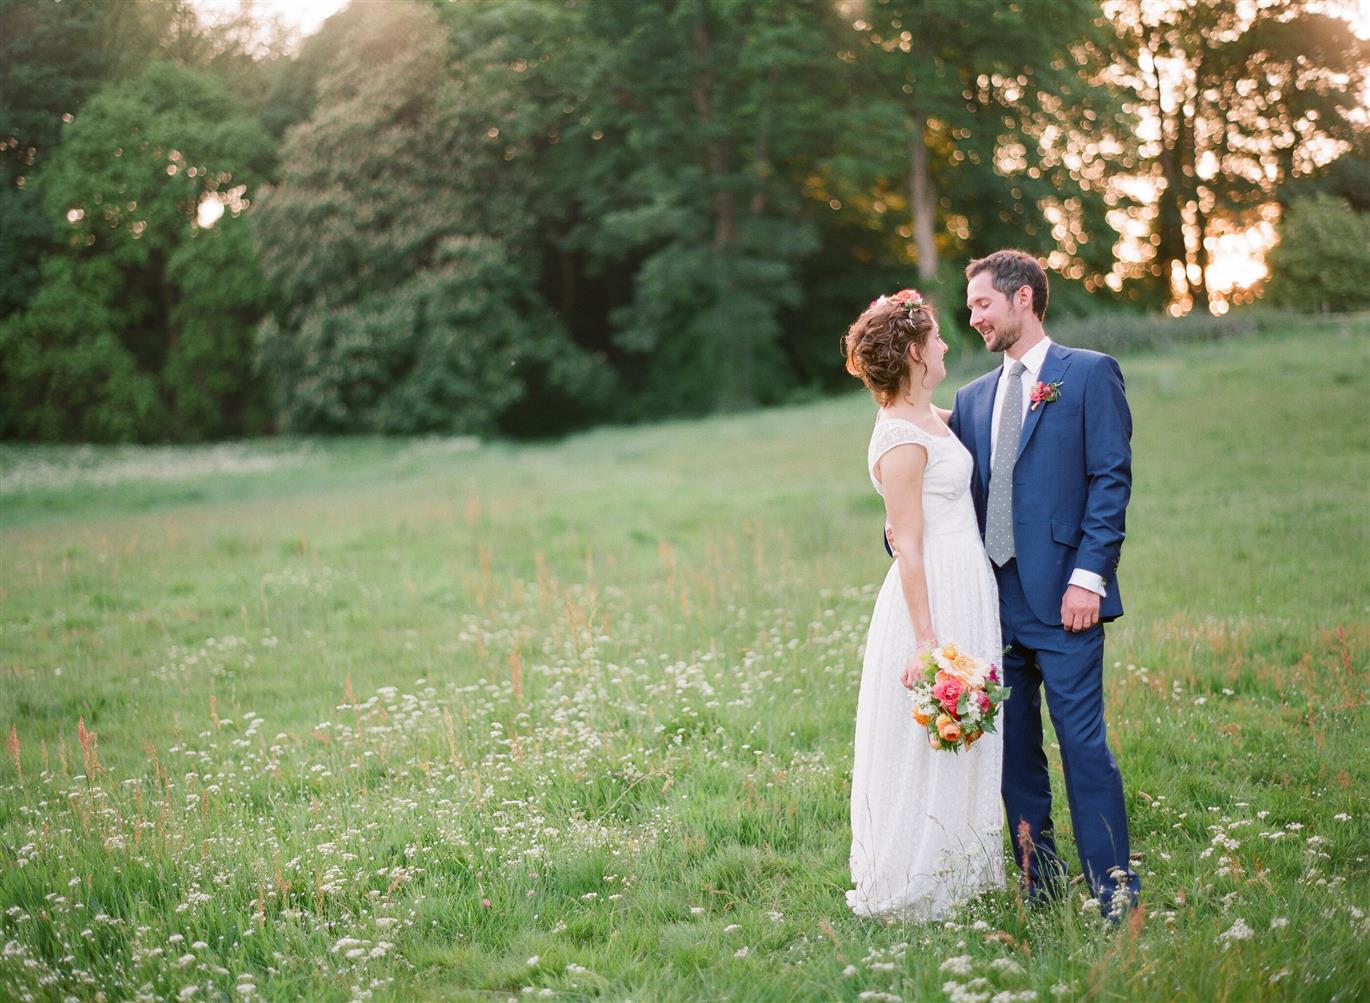 A 1940s Wedding Dress for a Sweet Spring Wedding from Taylor & Porter Photography